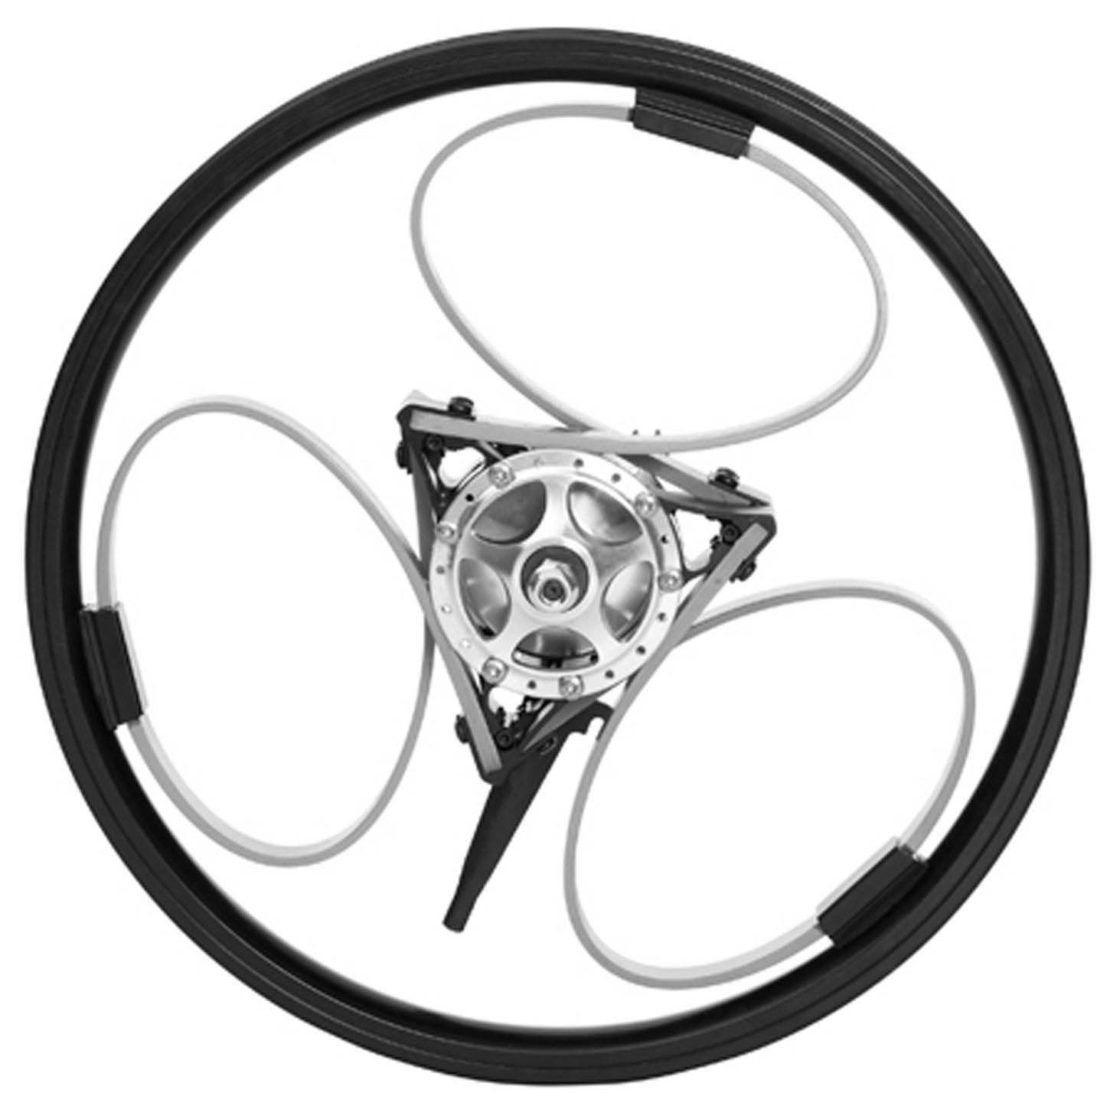 The Loopwheel's circular springs, in place of spokes, build suspension into the wheel itself